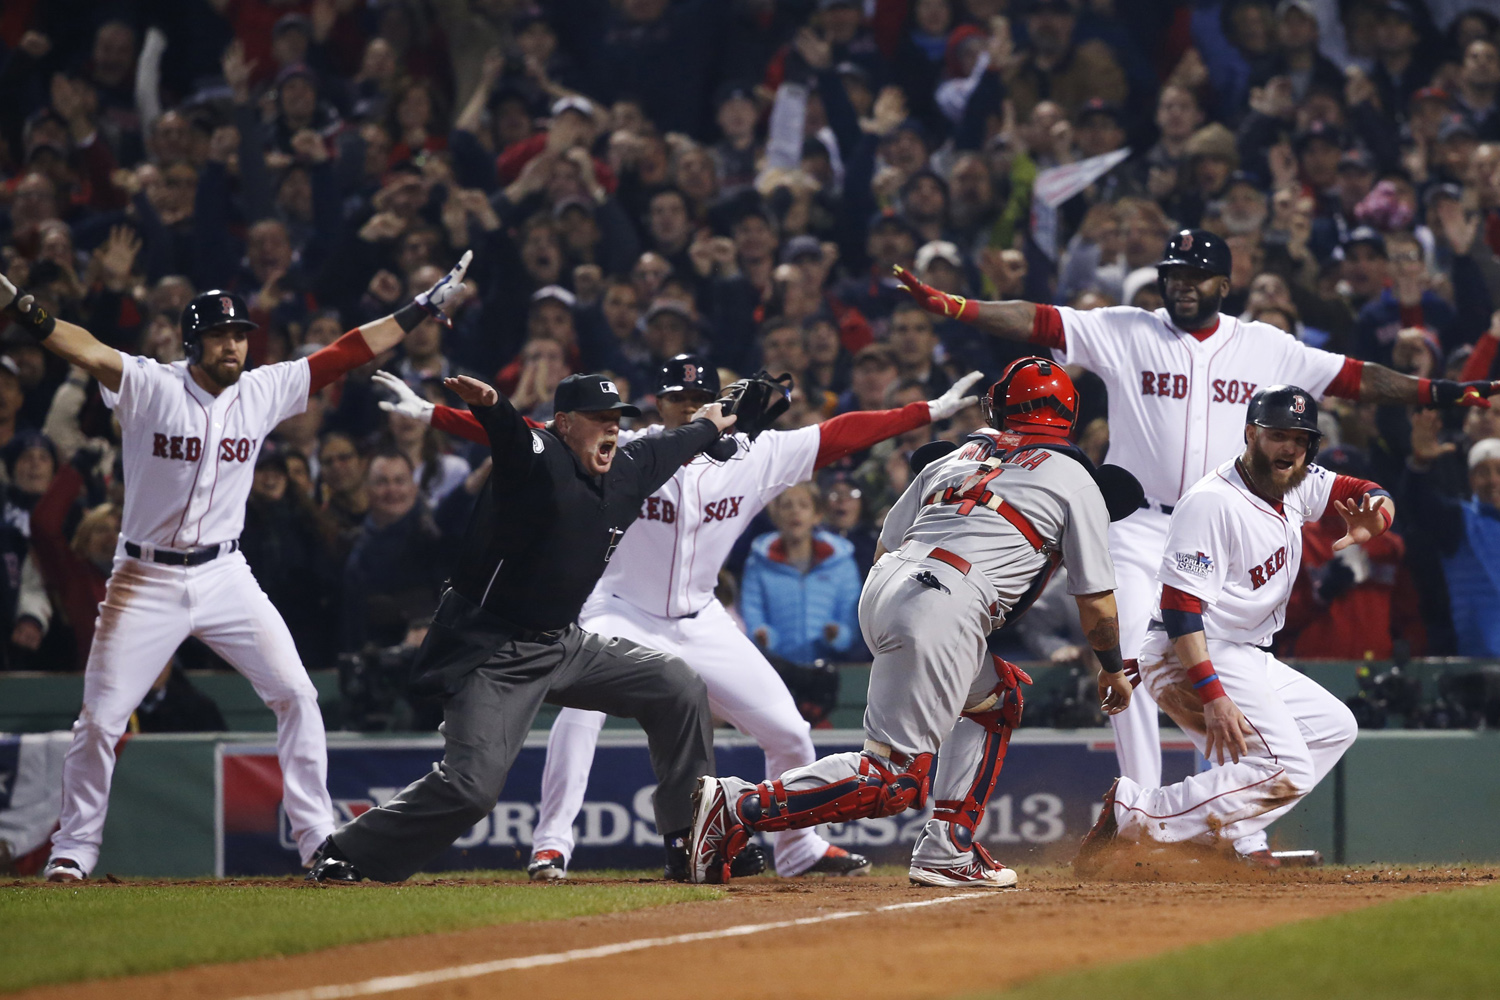 Oct. 30, 2013. St. Louis Cardinals catcher Yadier Molina looks back as home plate umpire Jim Joyce calls Boston Red Sox's Jonny Gomes safe on a three-run double by Shane Victorino during the third inning of Game 6 of the World Series in Boston.